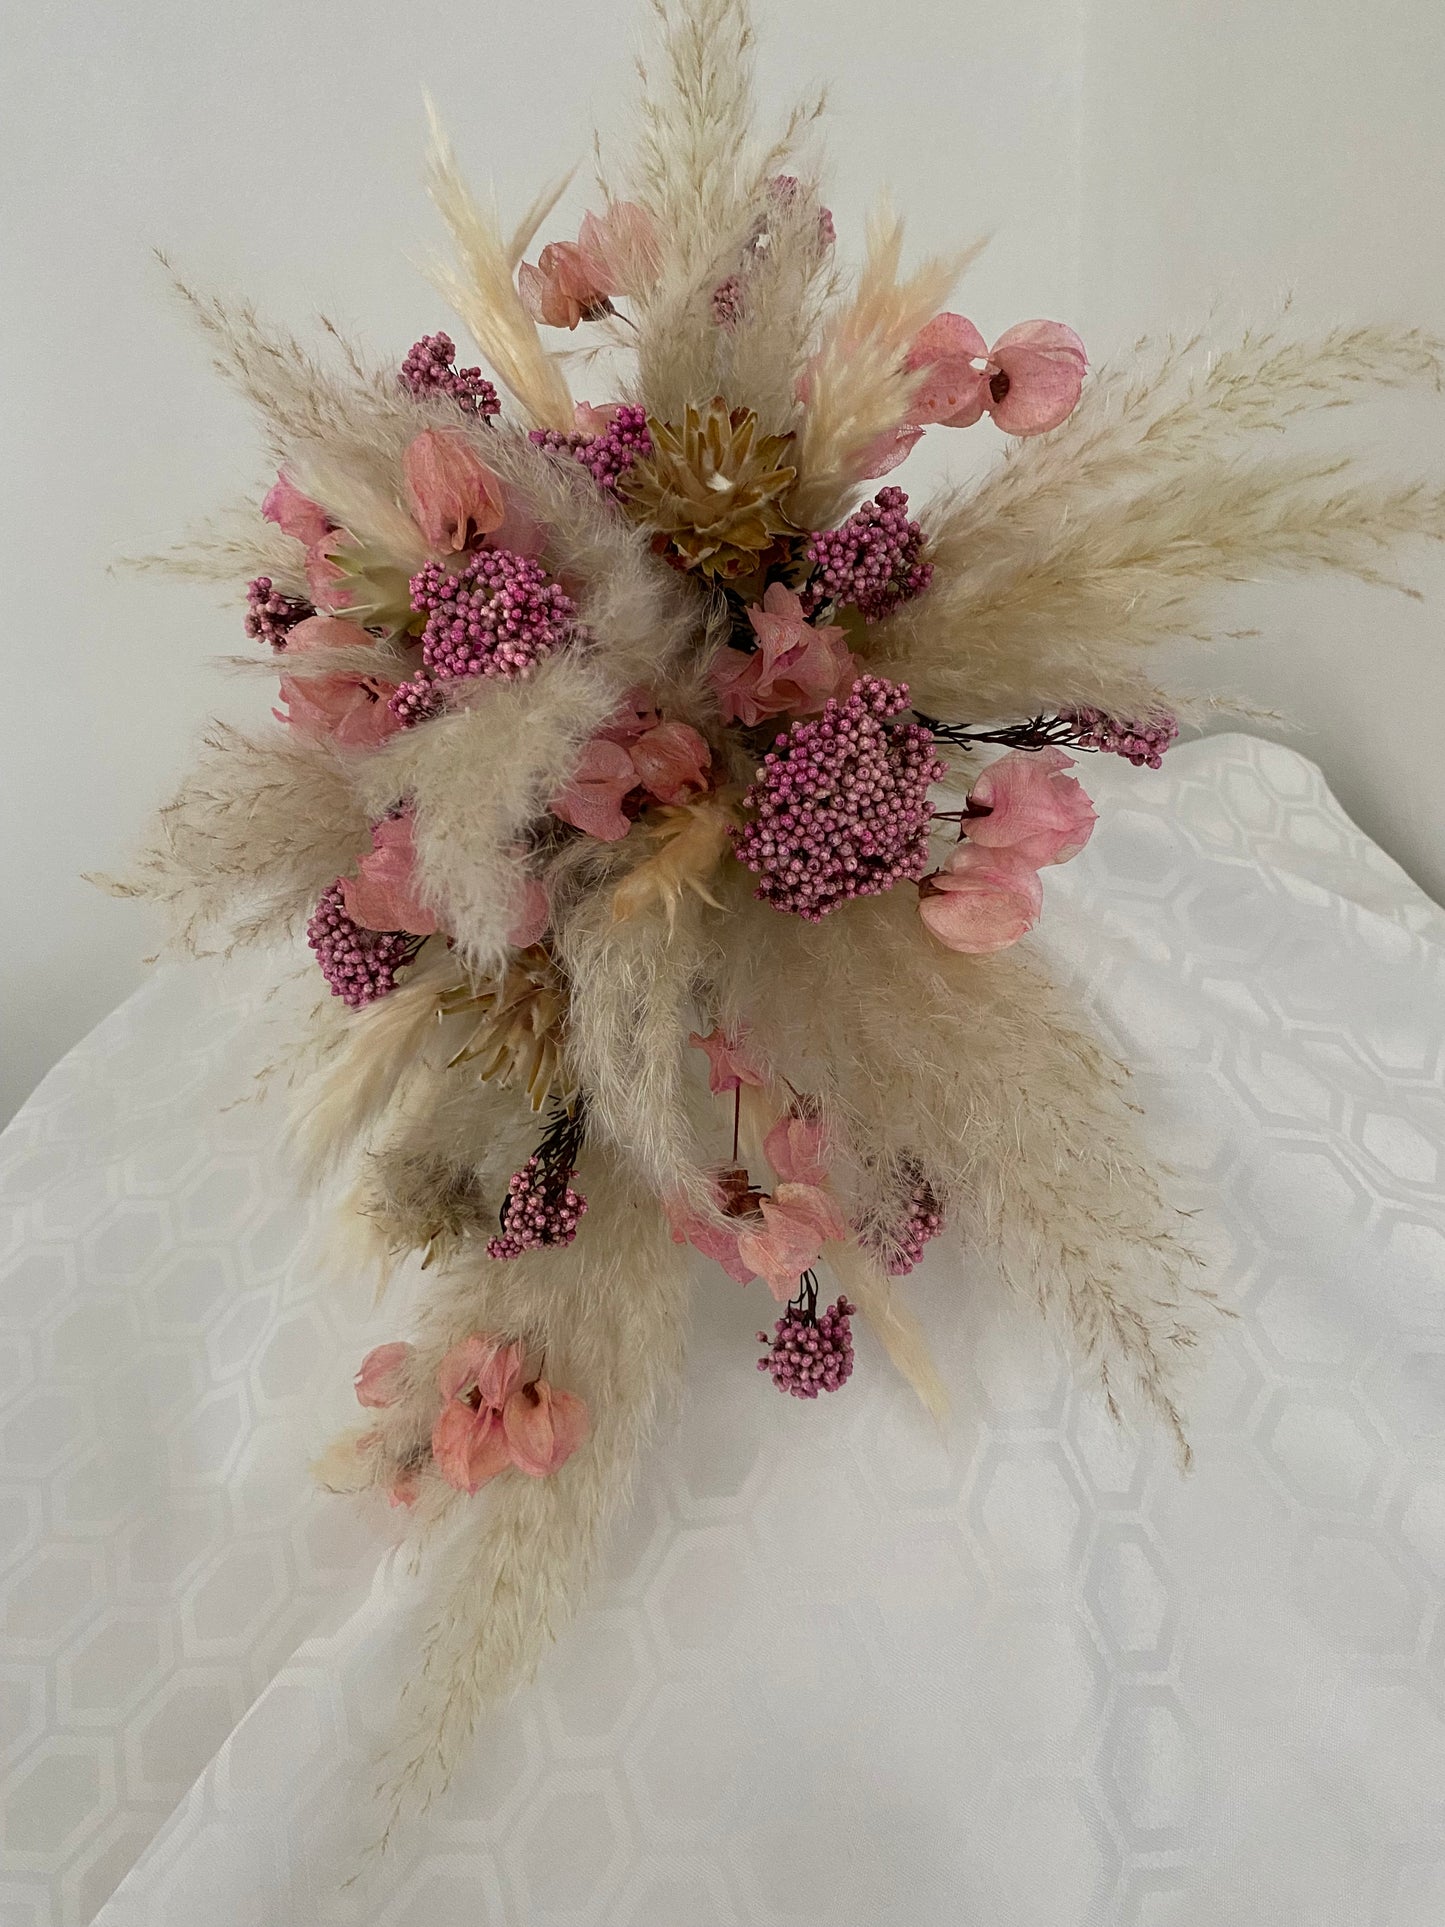 Dried Flowers Brides wedding bouquet. Natural and long lasting. Natural shades of pink and cream